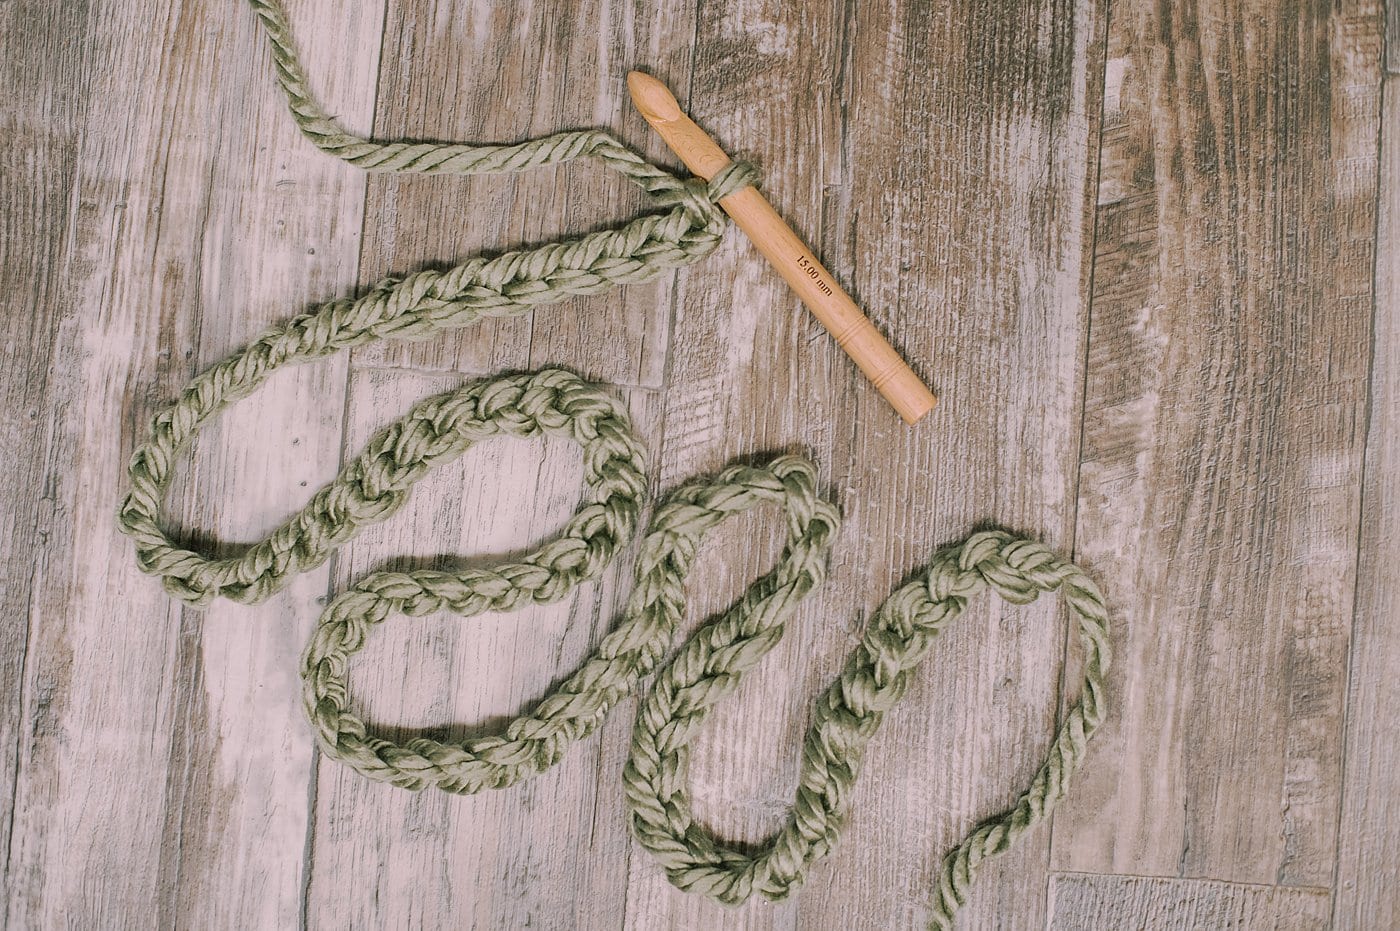 Keep making chain stitches using the chunky yarn and your garland will grow.